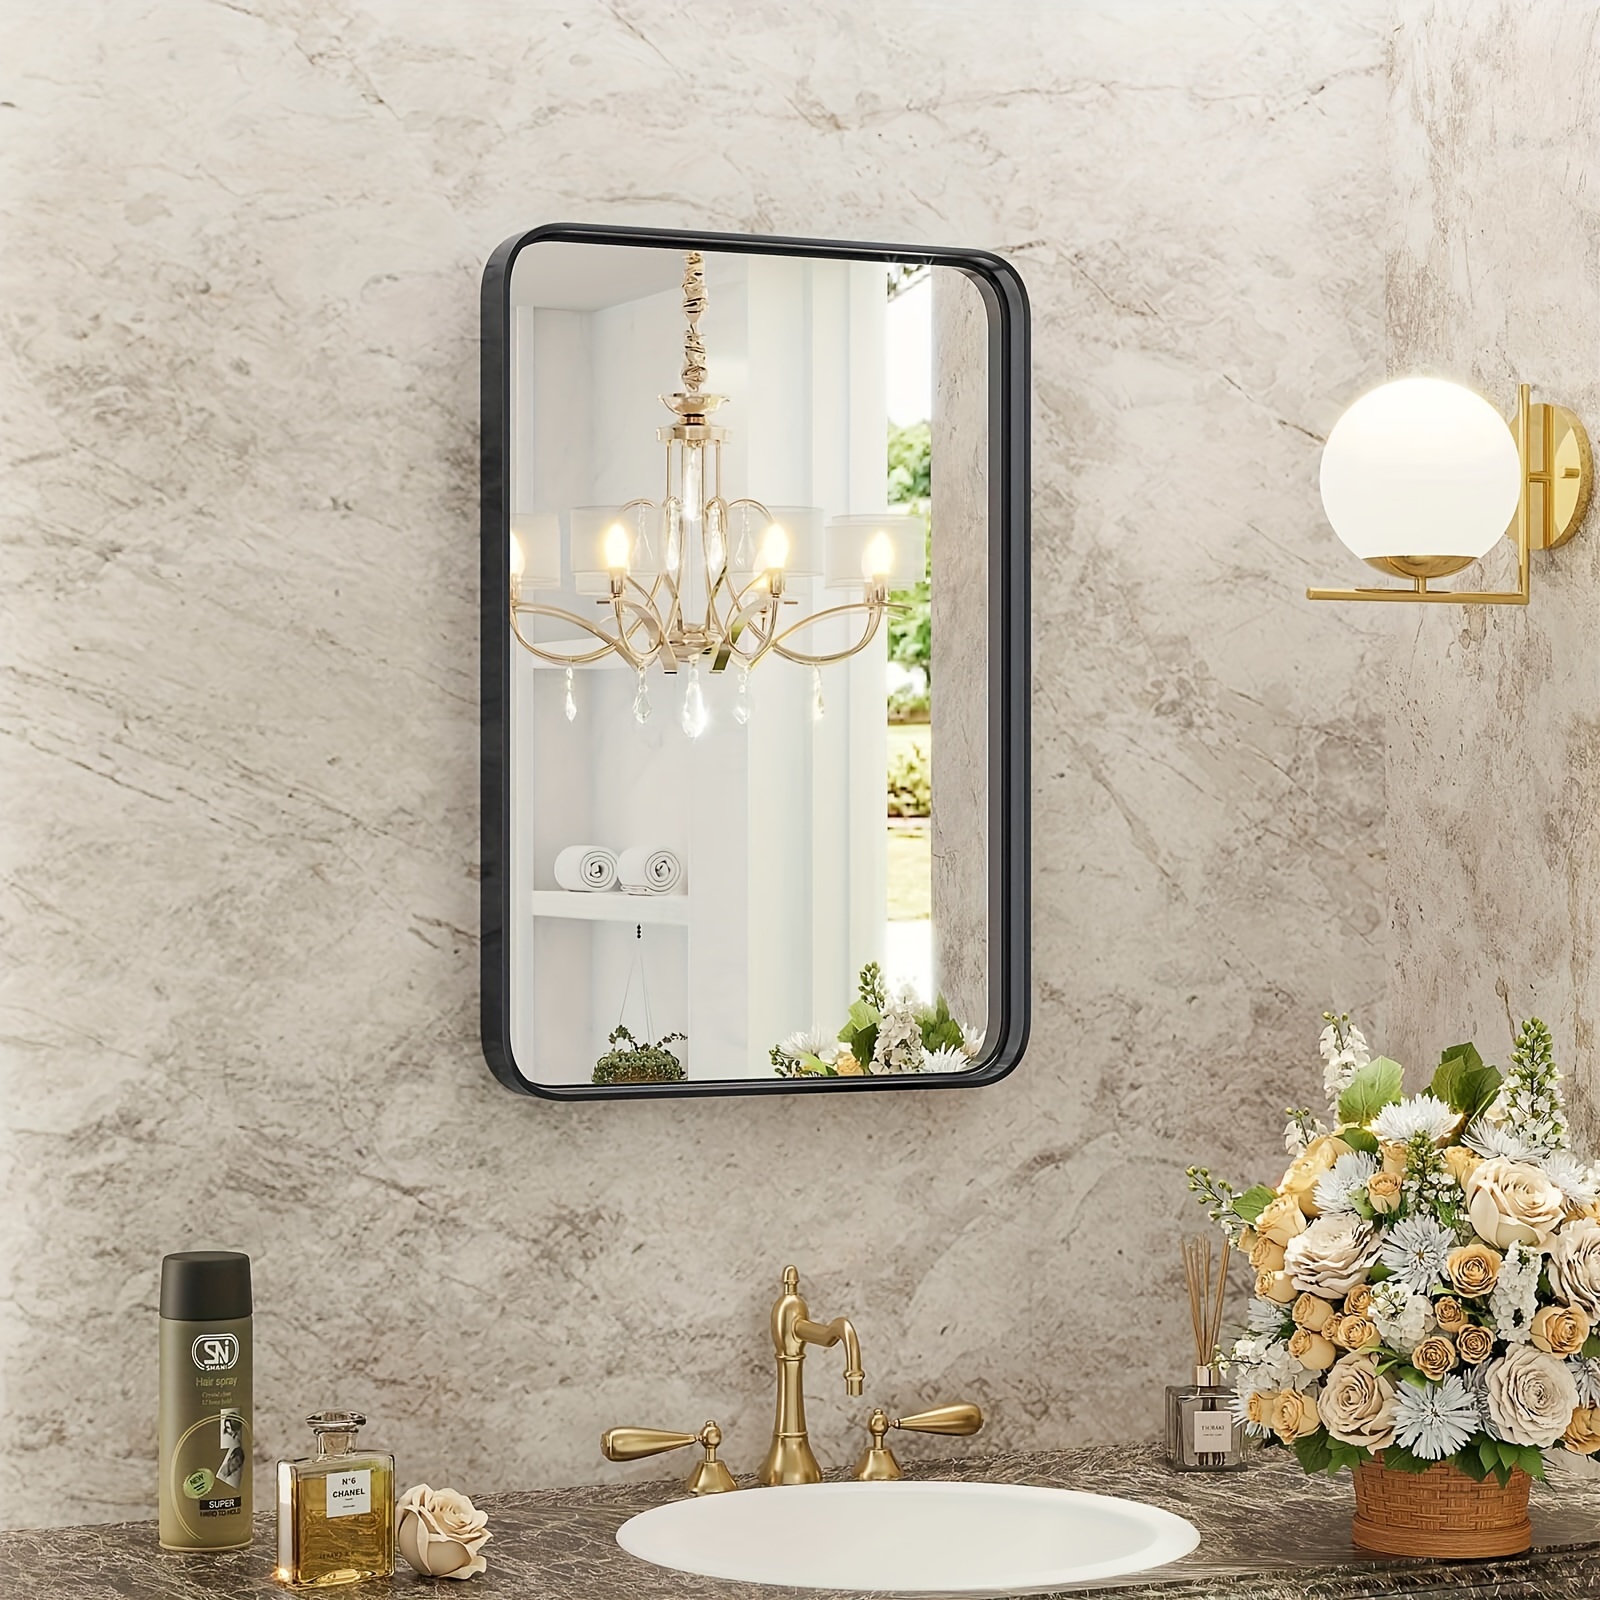 

1pc Wall Mounted Makeup Mirror For Bathroom, Black Metal Framed, Rounded Corner Rectangle Vanity Mirror, Makeup Mirrors For Wall, Anti-rust Tempered Glass, Hangs Horizontally Or Vertical